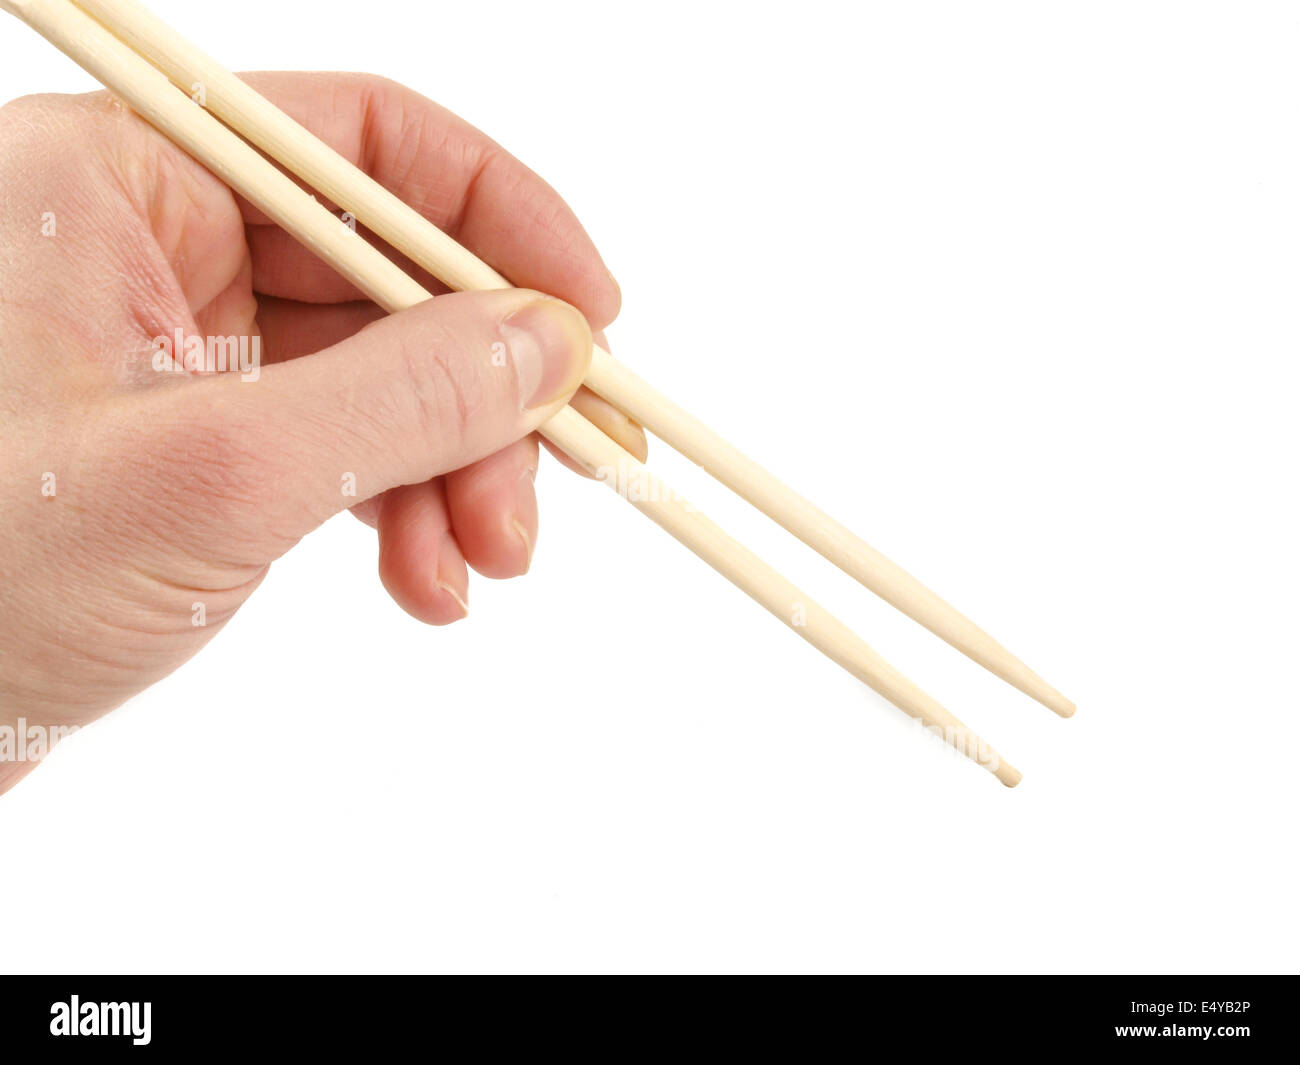 Eating with chopsticks Stock Photo